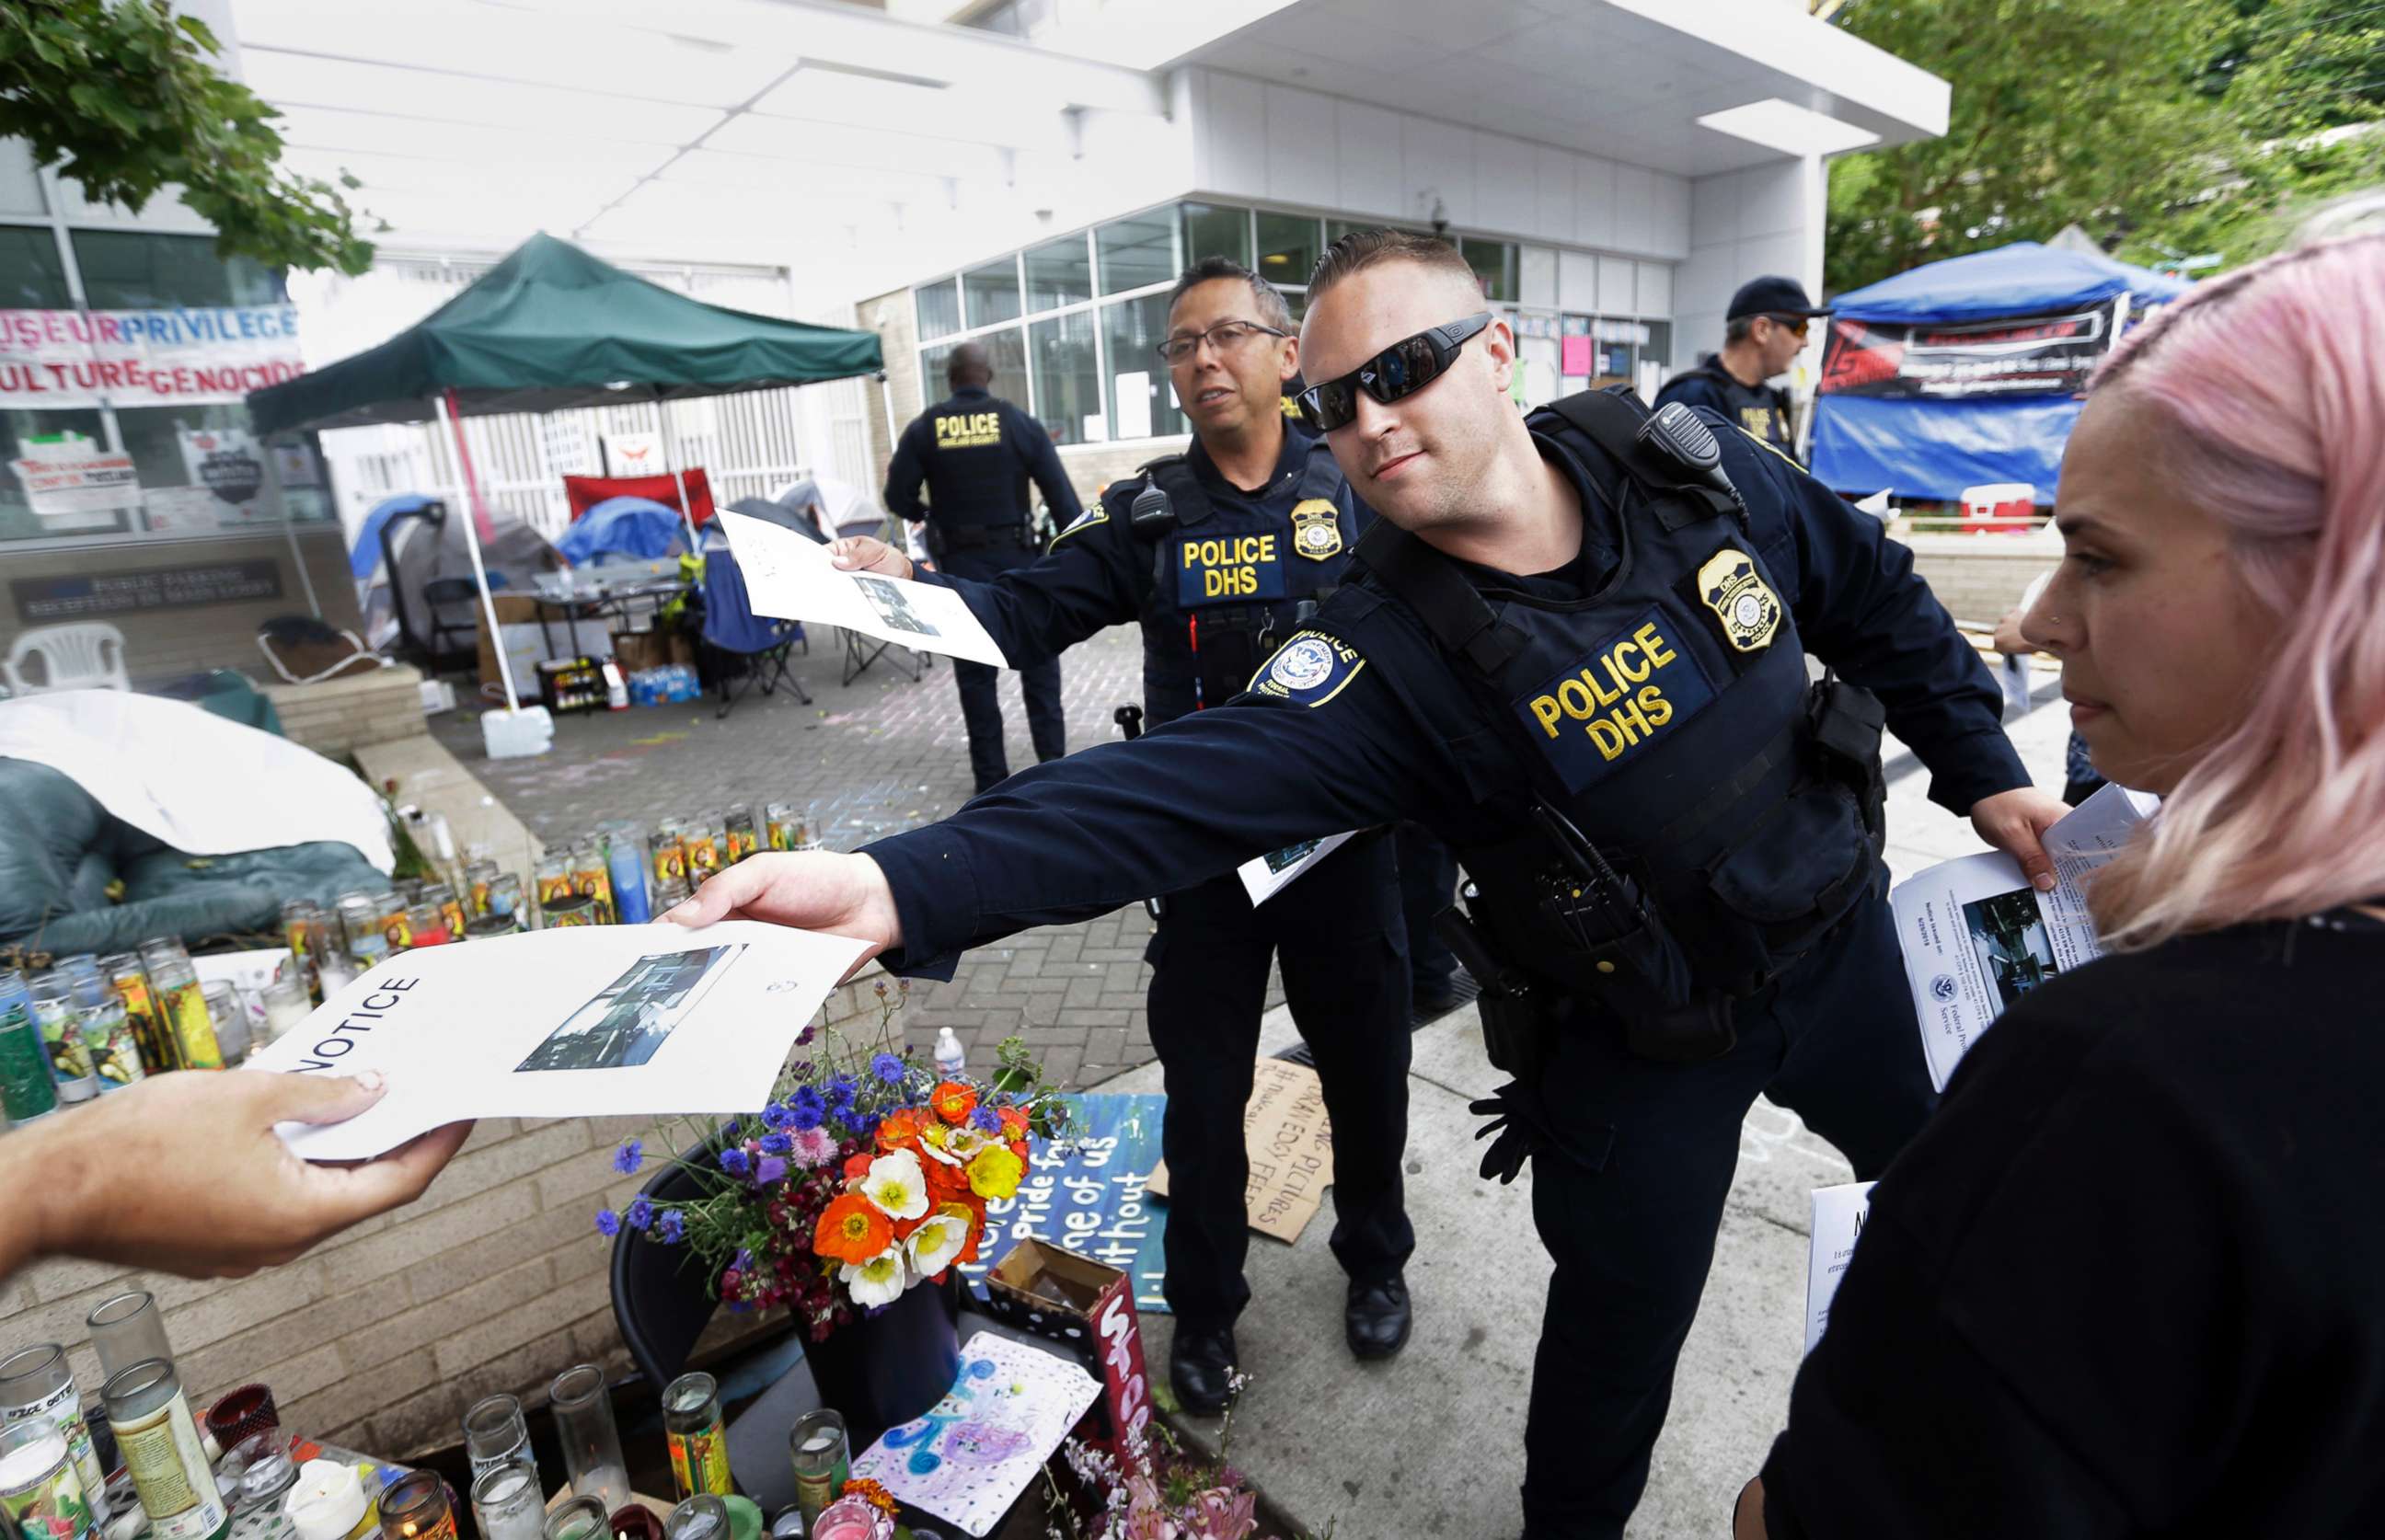 PHOTO: Law enforcement officers hand out notices to vacate to demonstrators at a protest camp on property outside the U.S. Immigration and Customs Enforcement office in Portland, Ore., June 25, 2018.